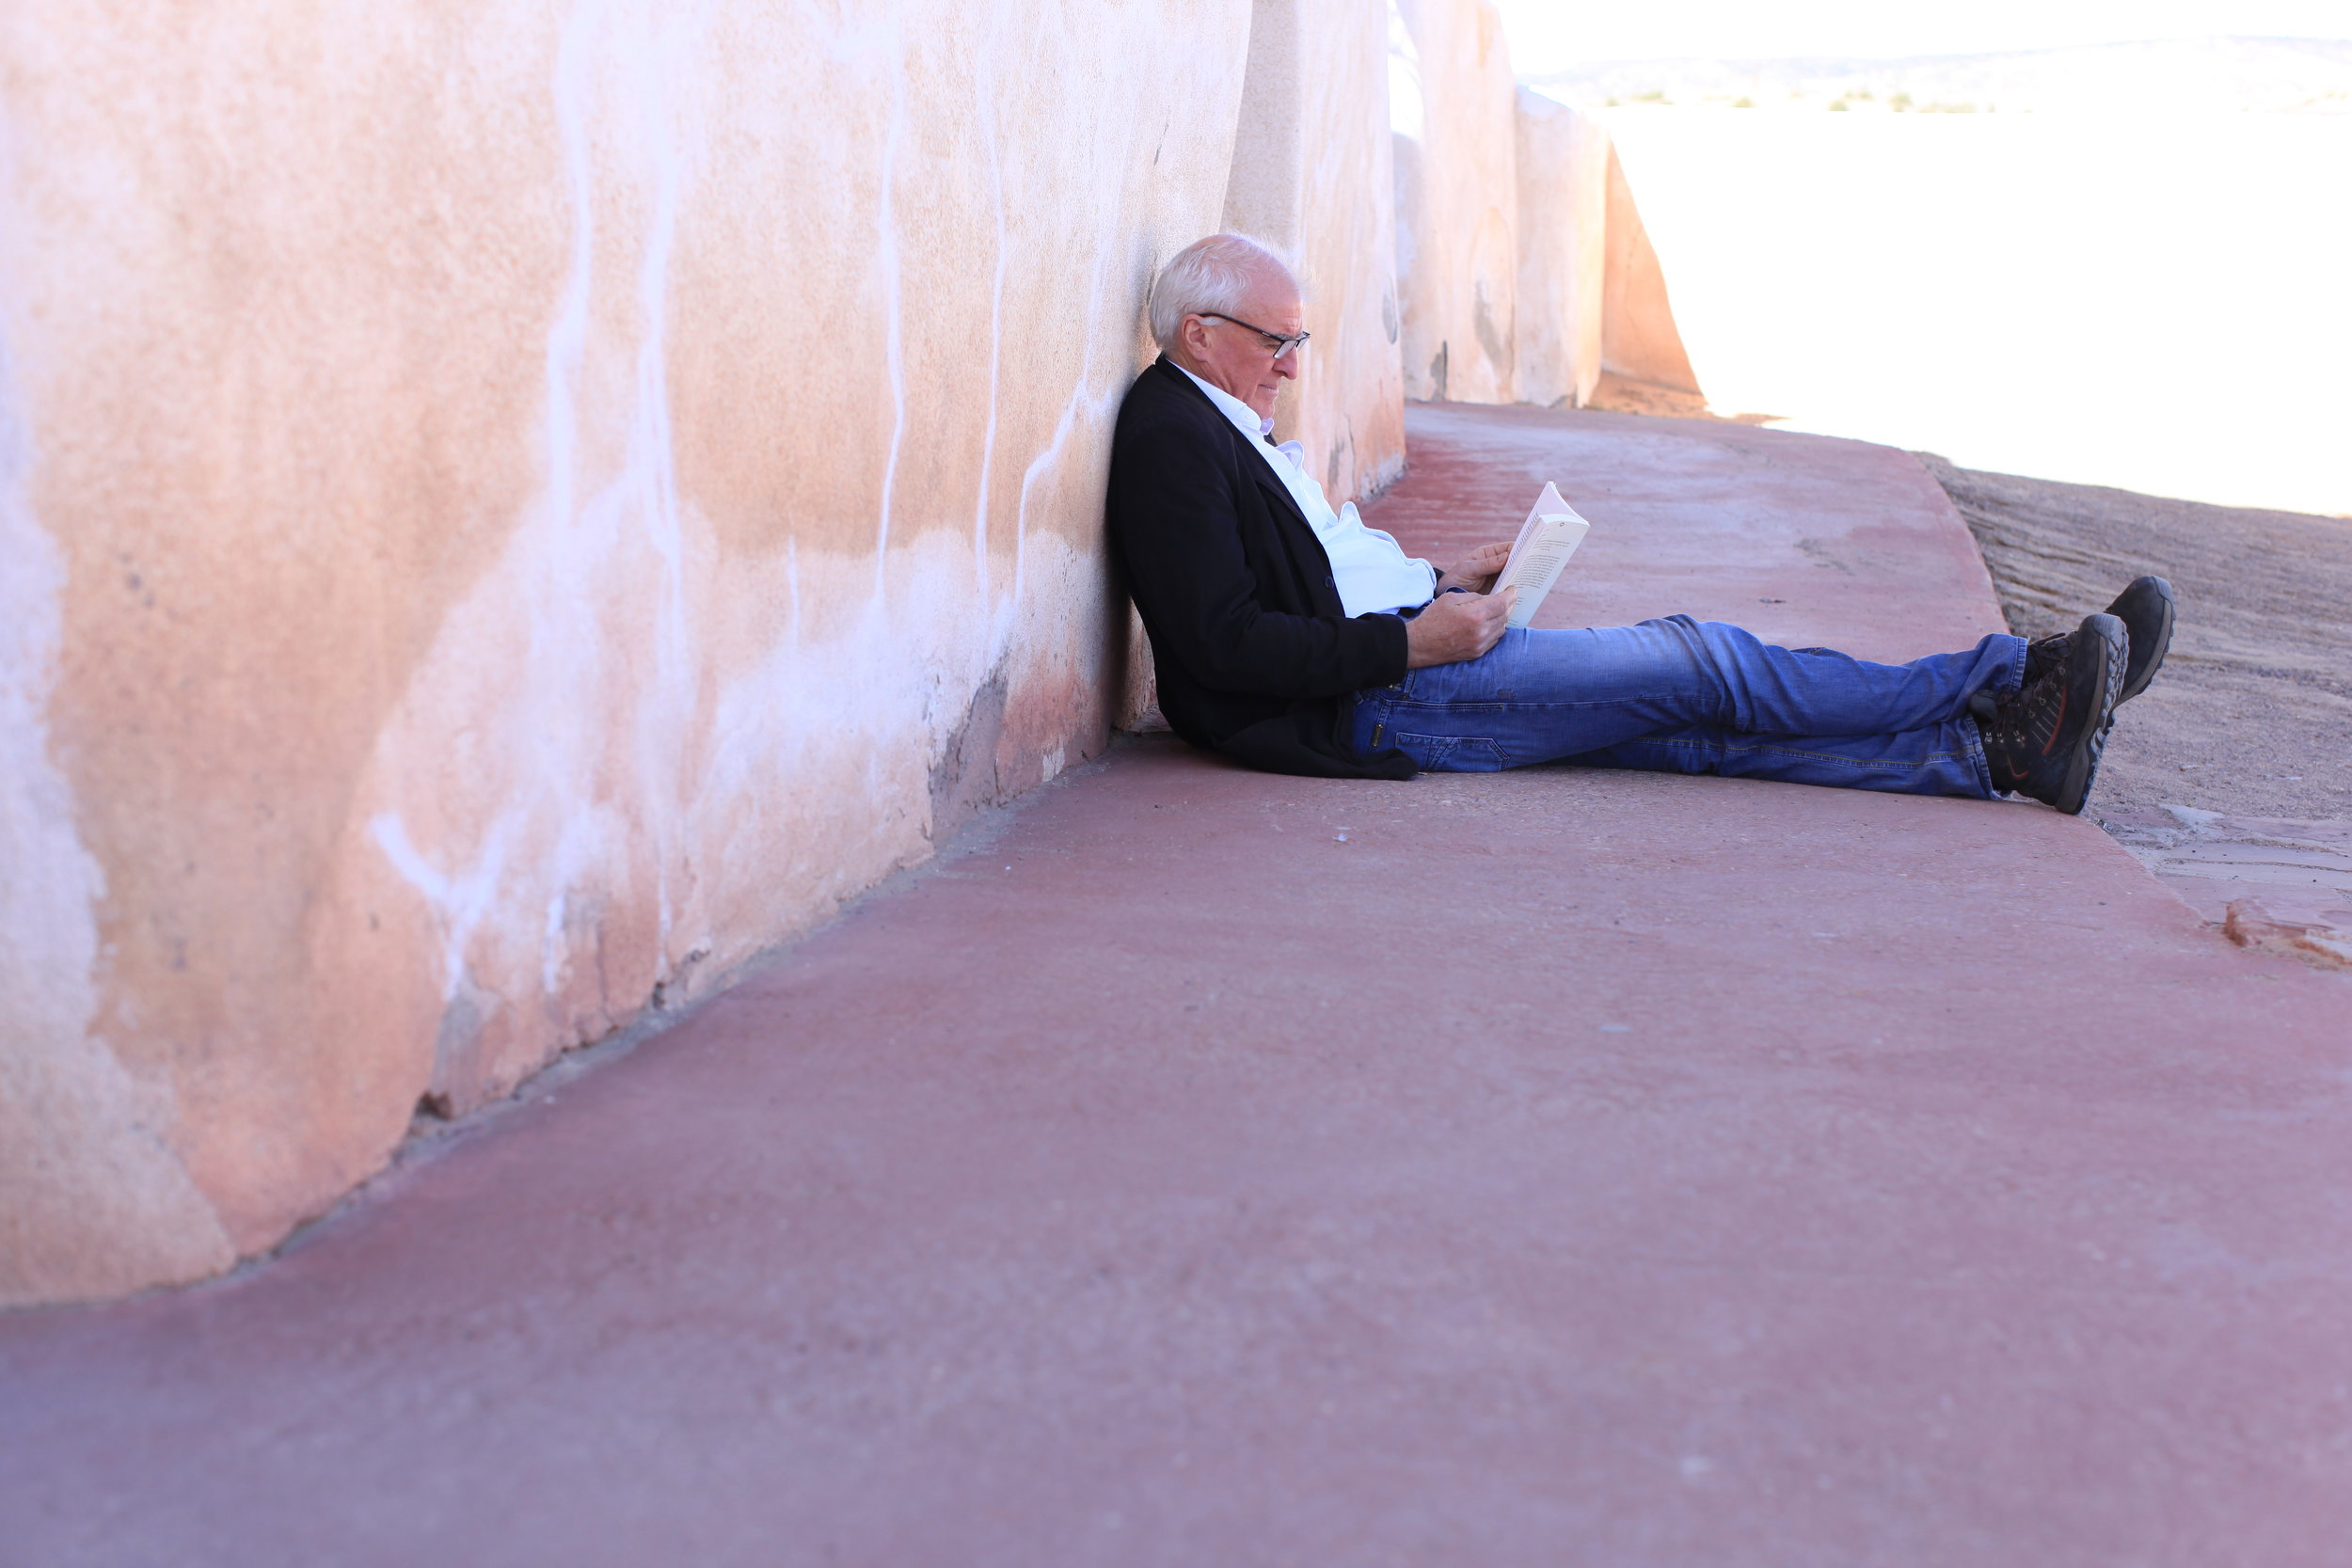  ... whilst Stephen catches up with his reading in the shade of the Mission church. 